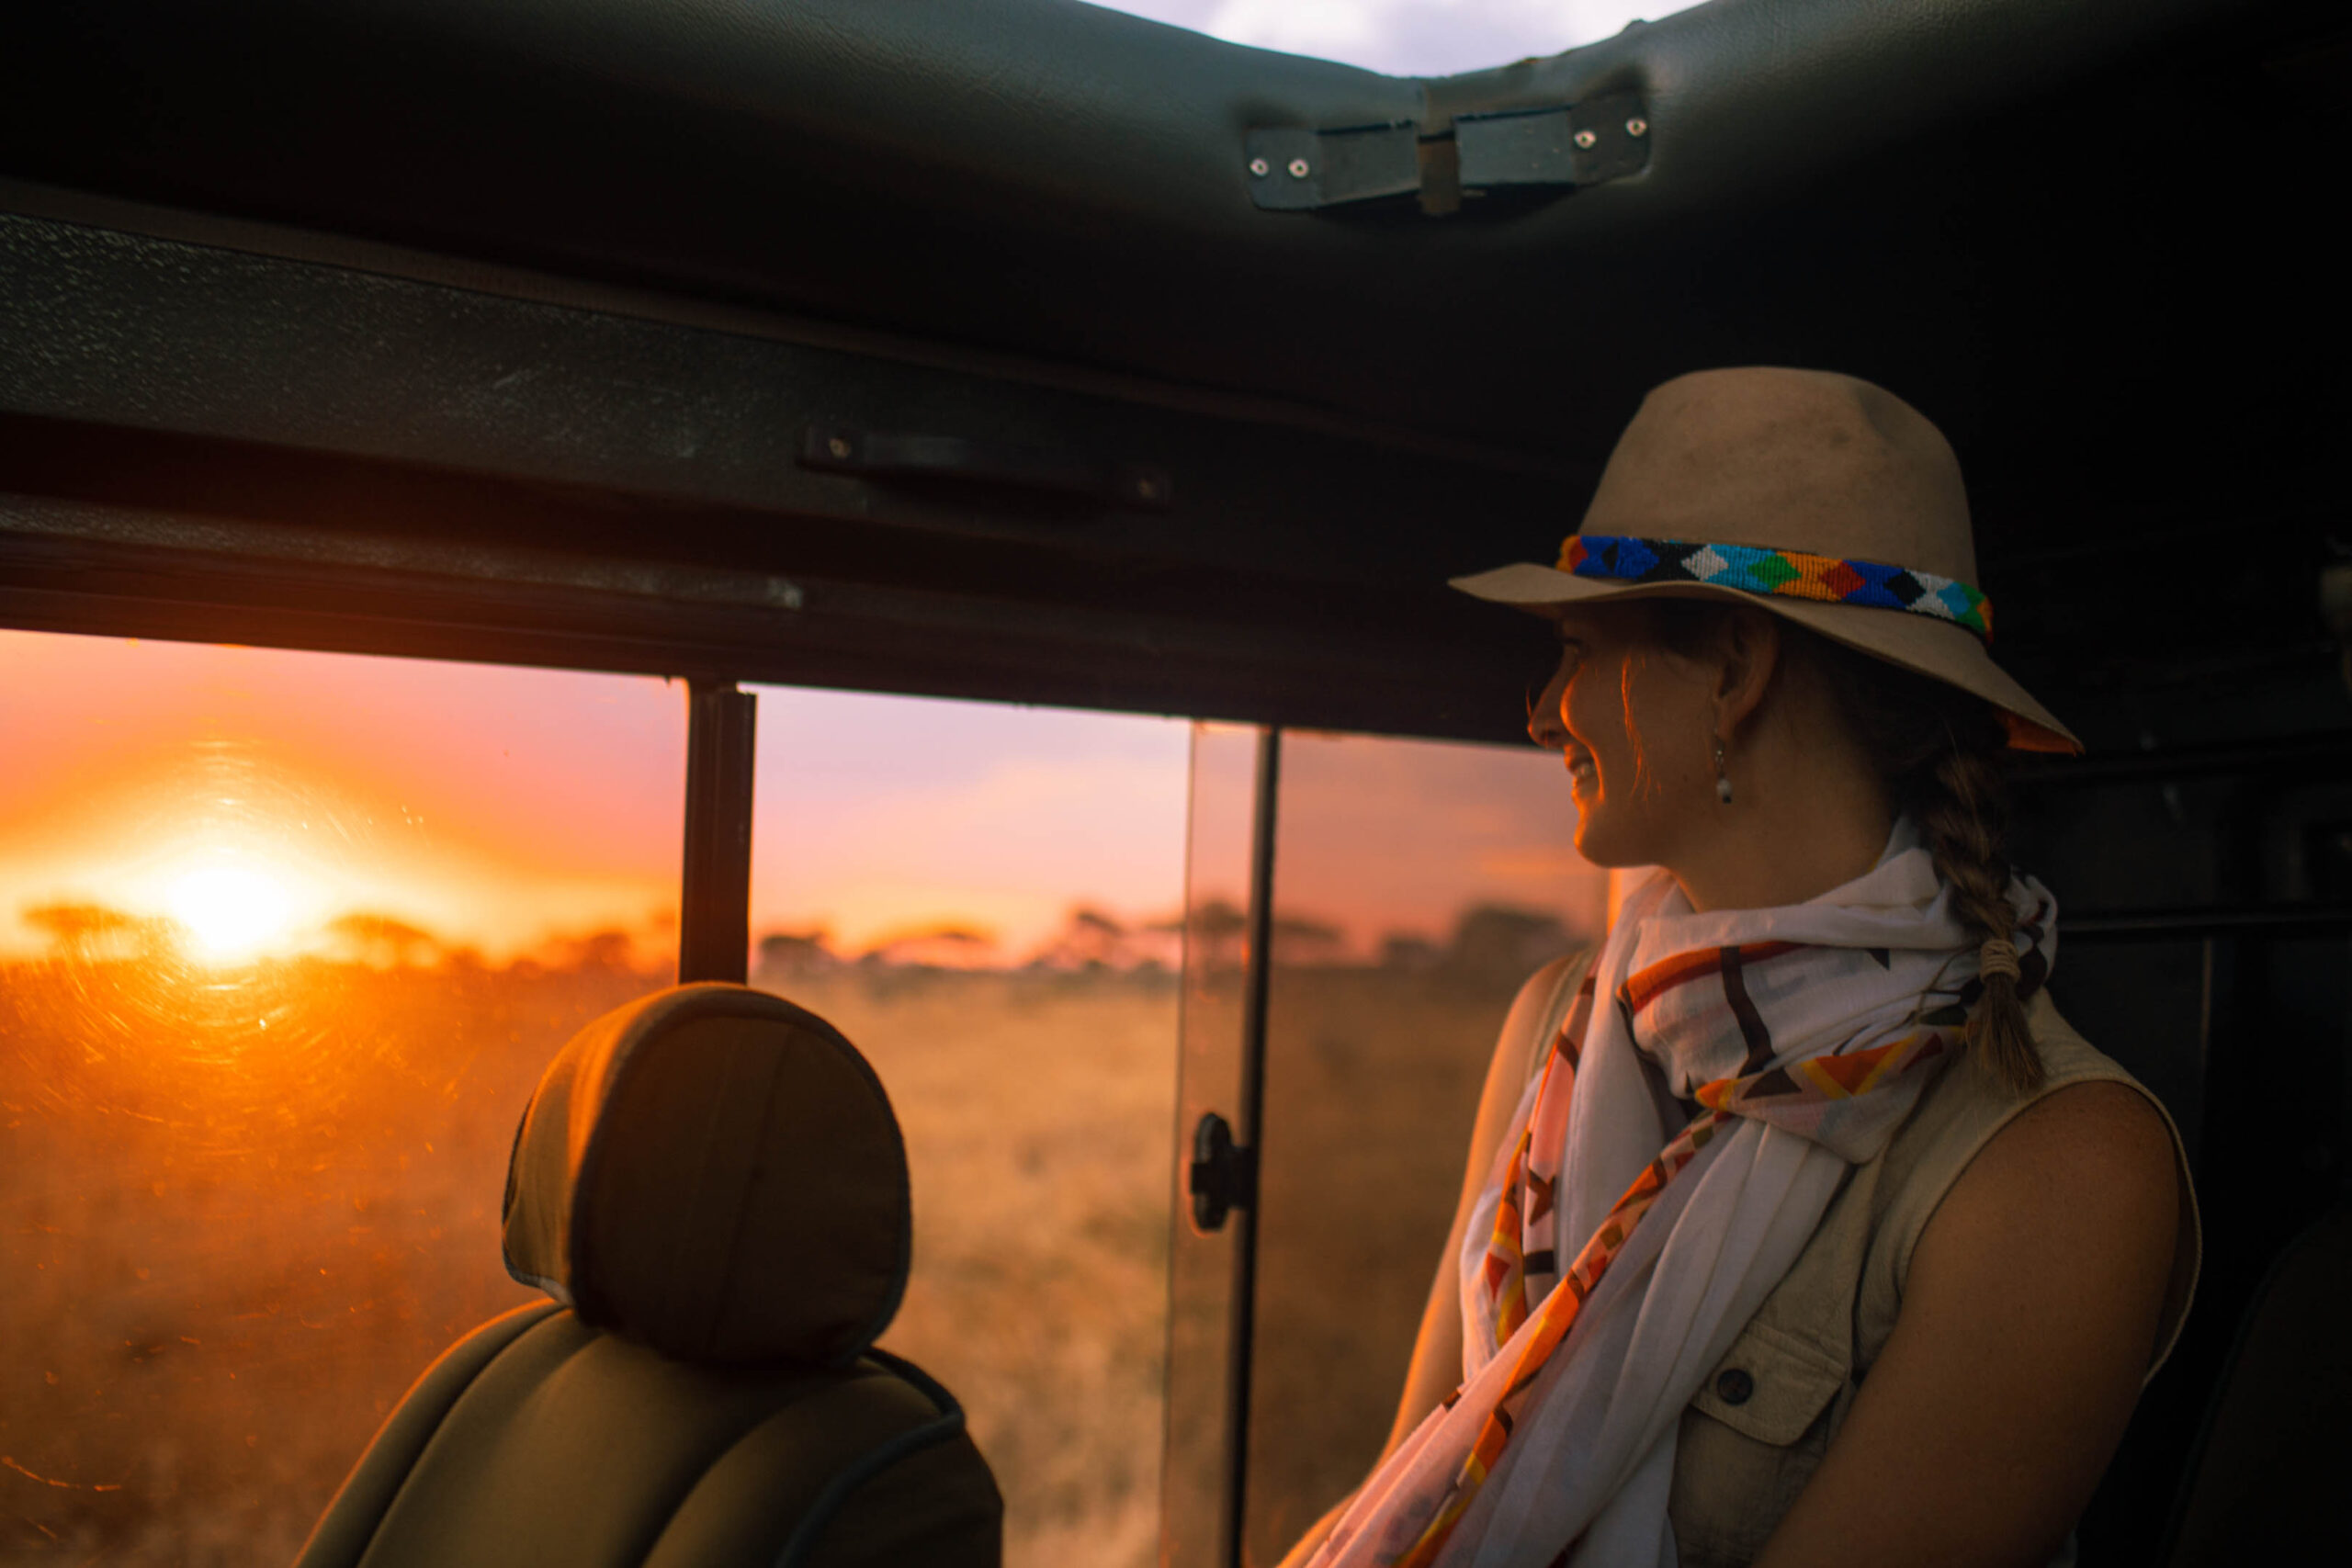 A lady on safari in Africa